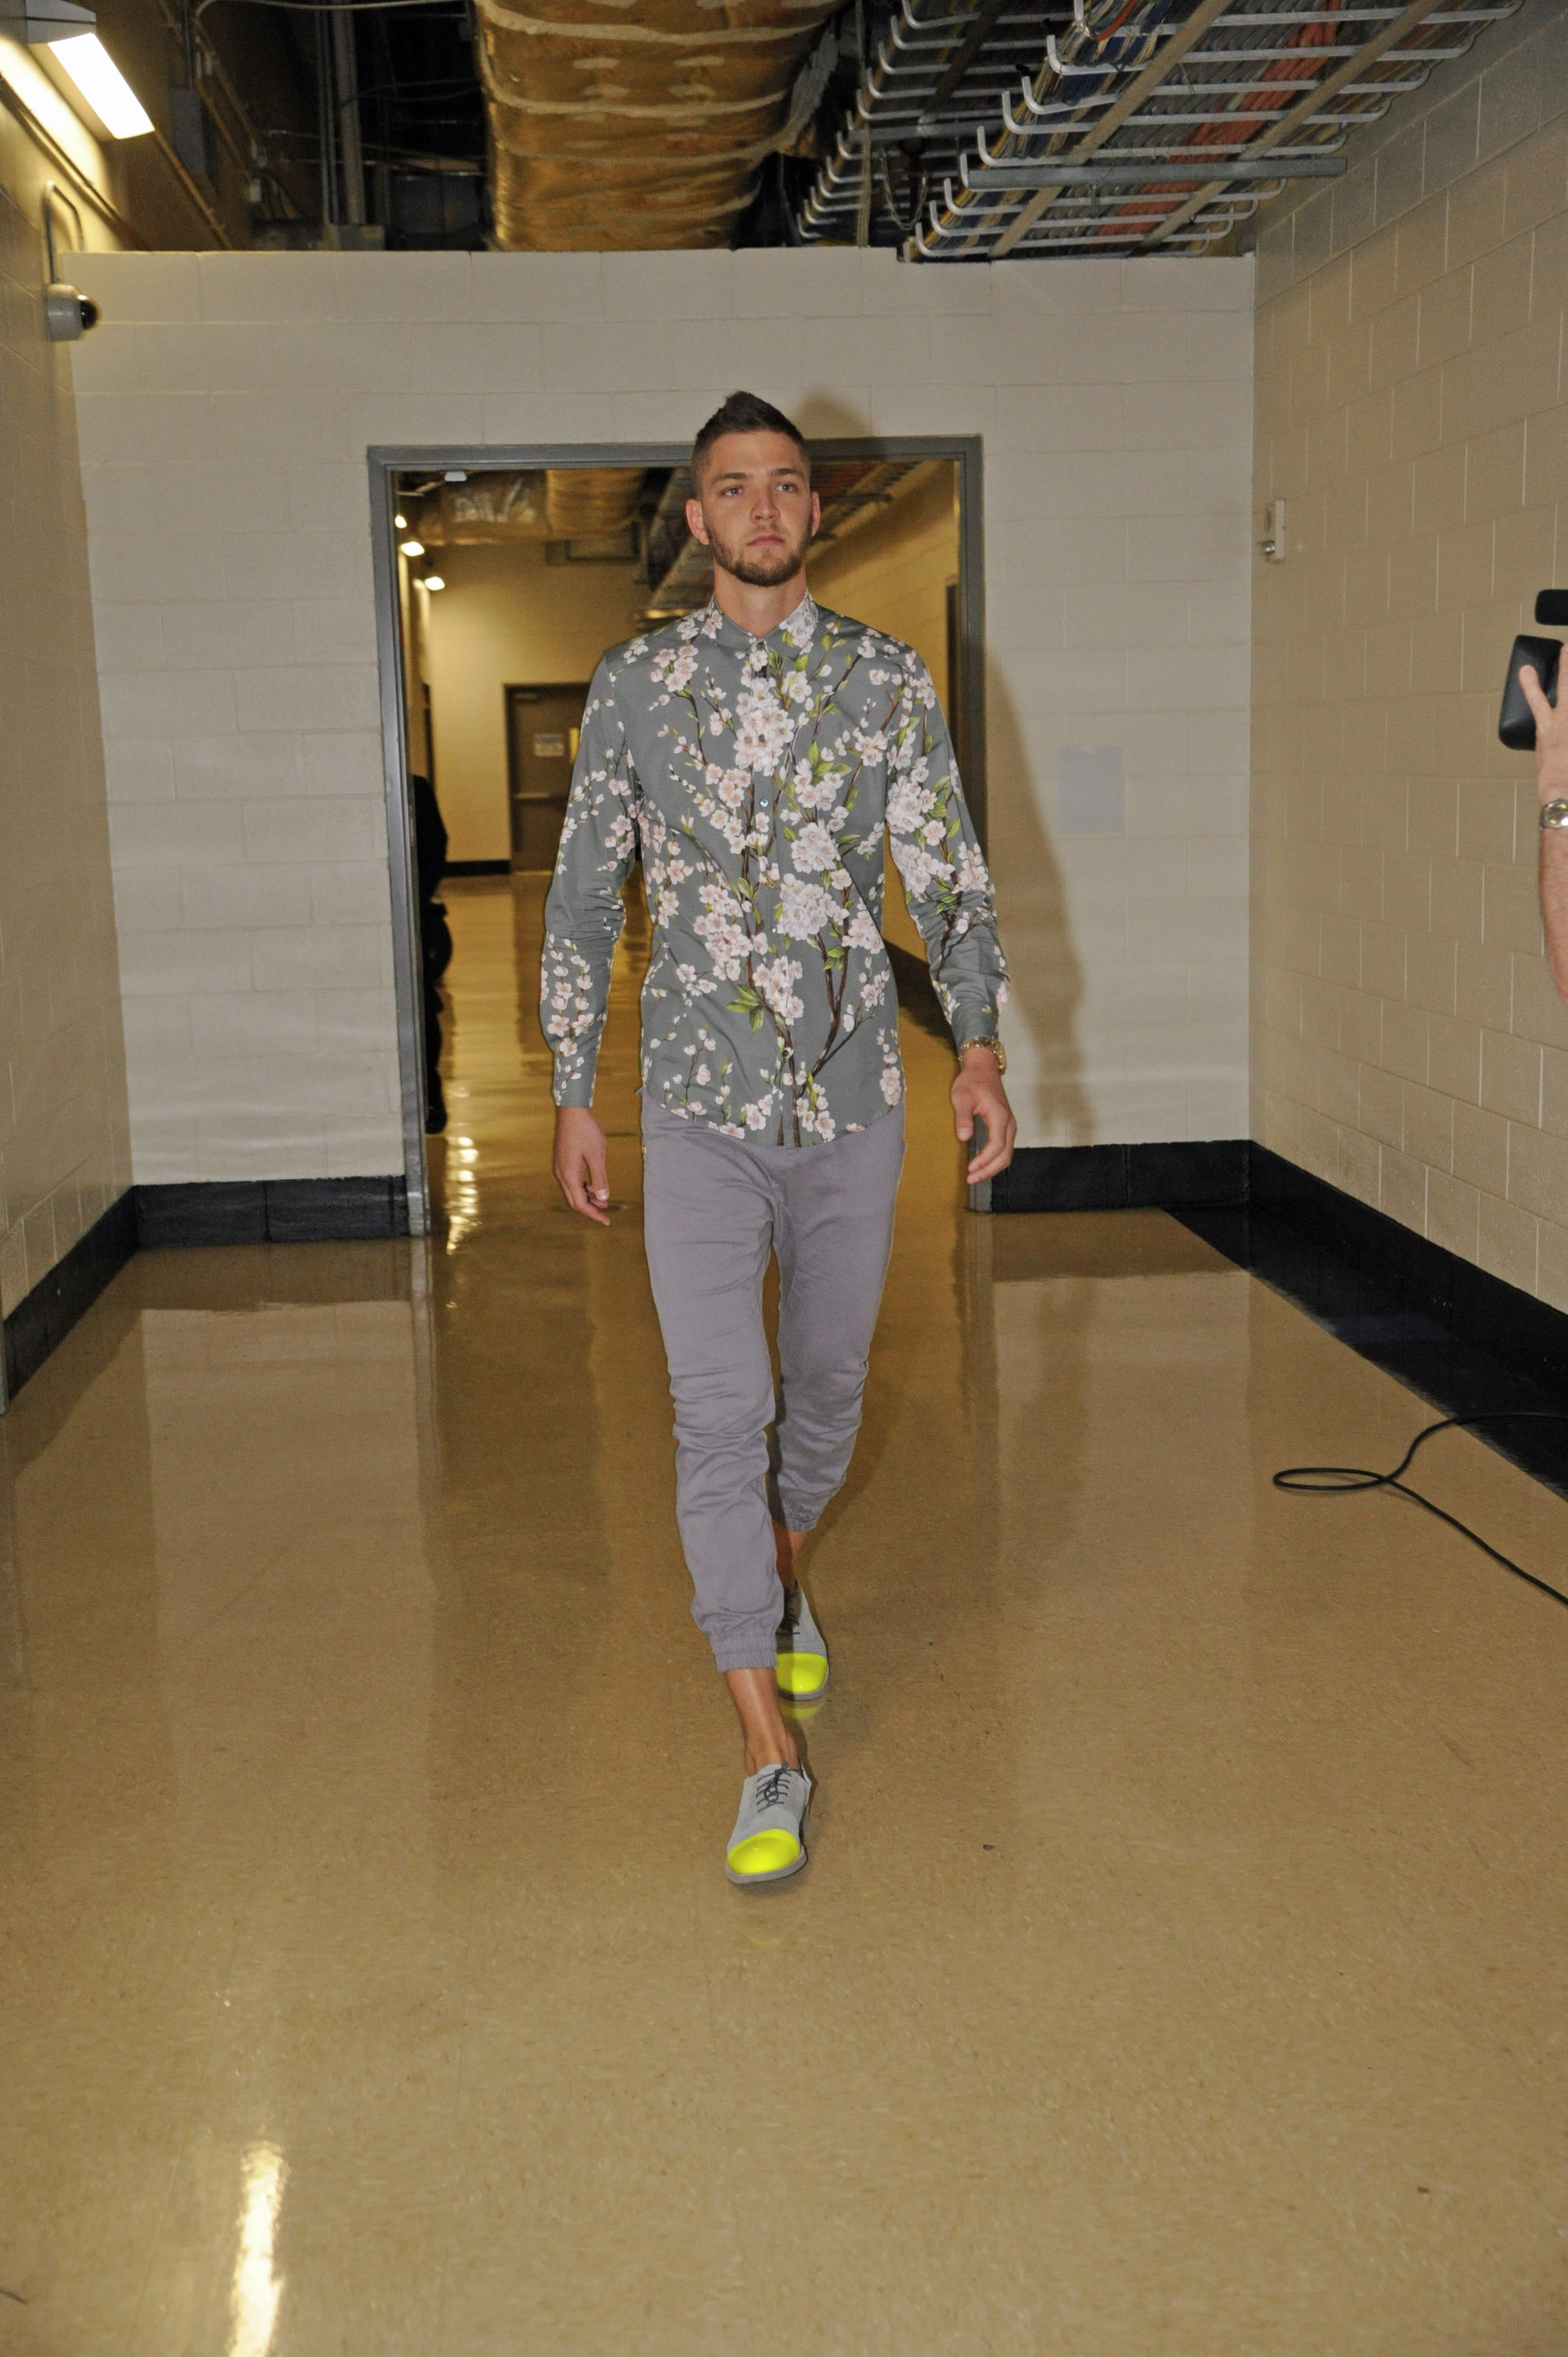 This is a photo of Chandler Parsons